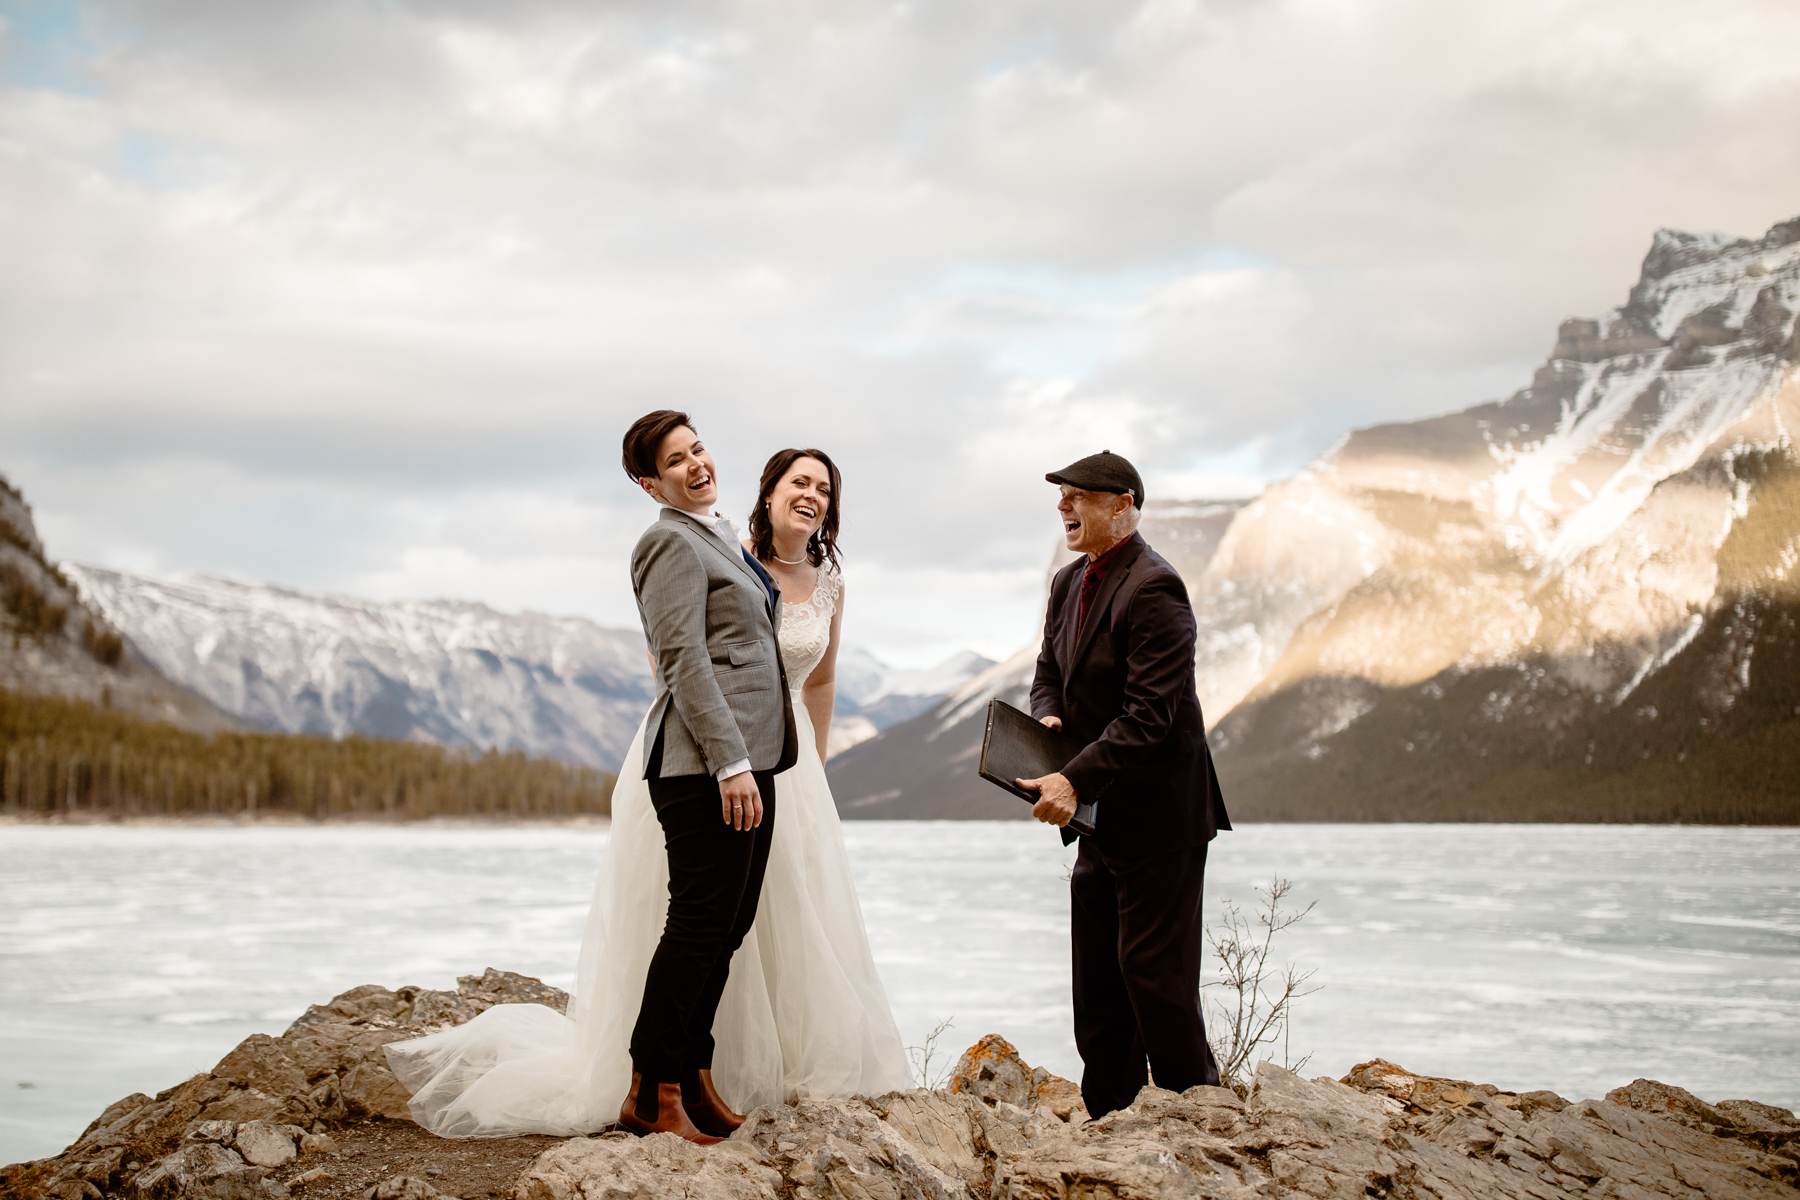 Banff National Park Elopement Photography with LGBTQ-friendly photographers - Image 24